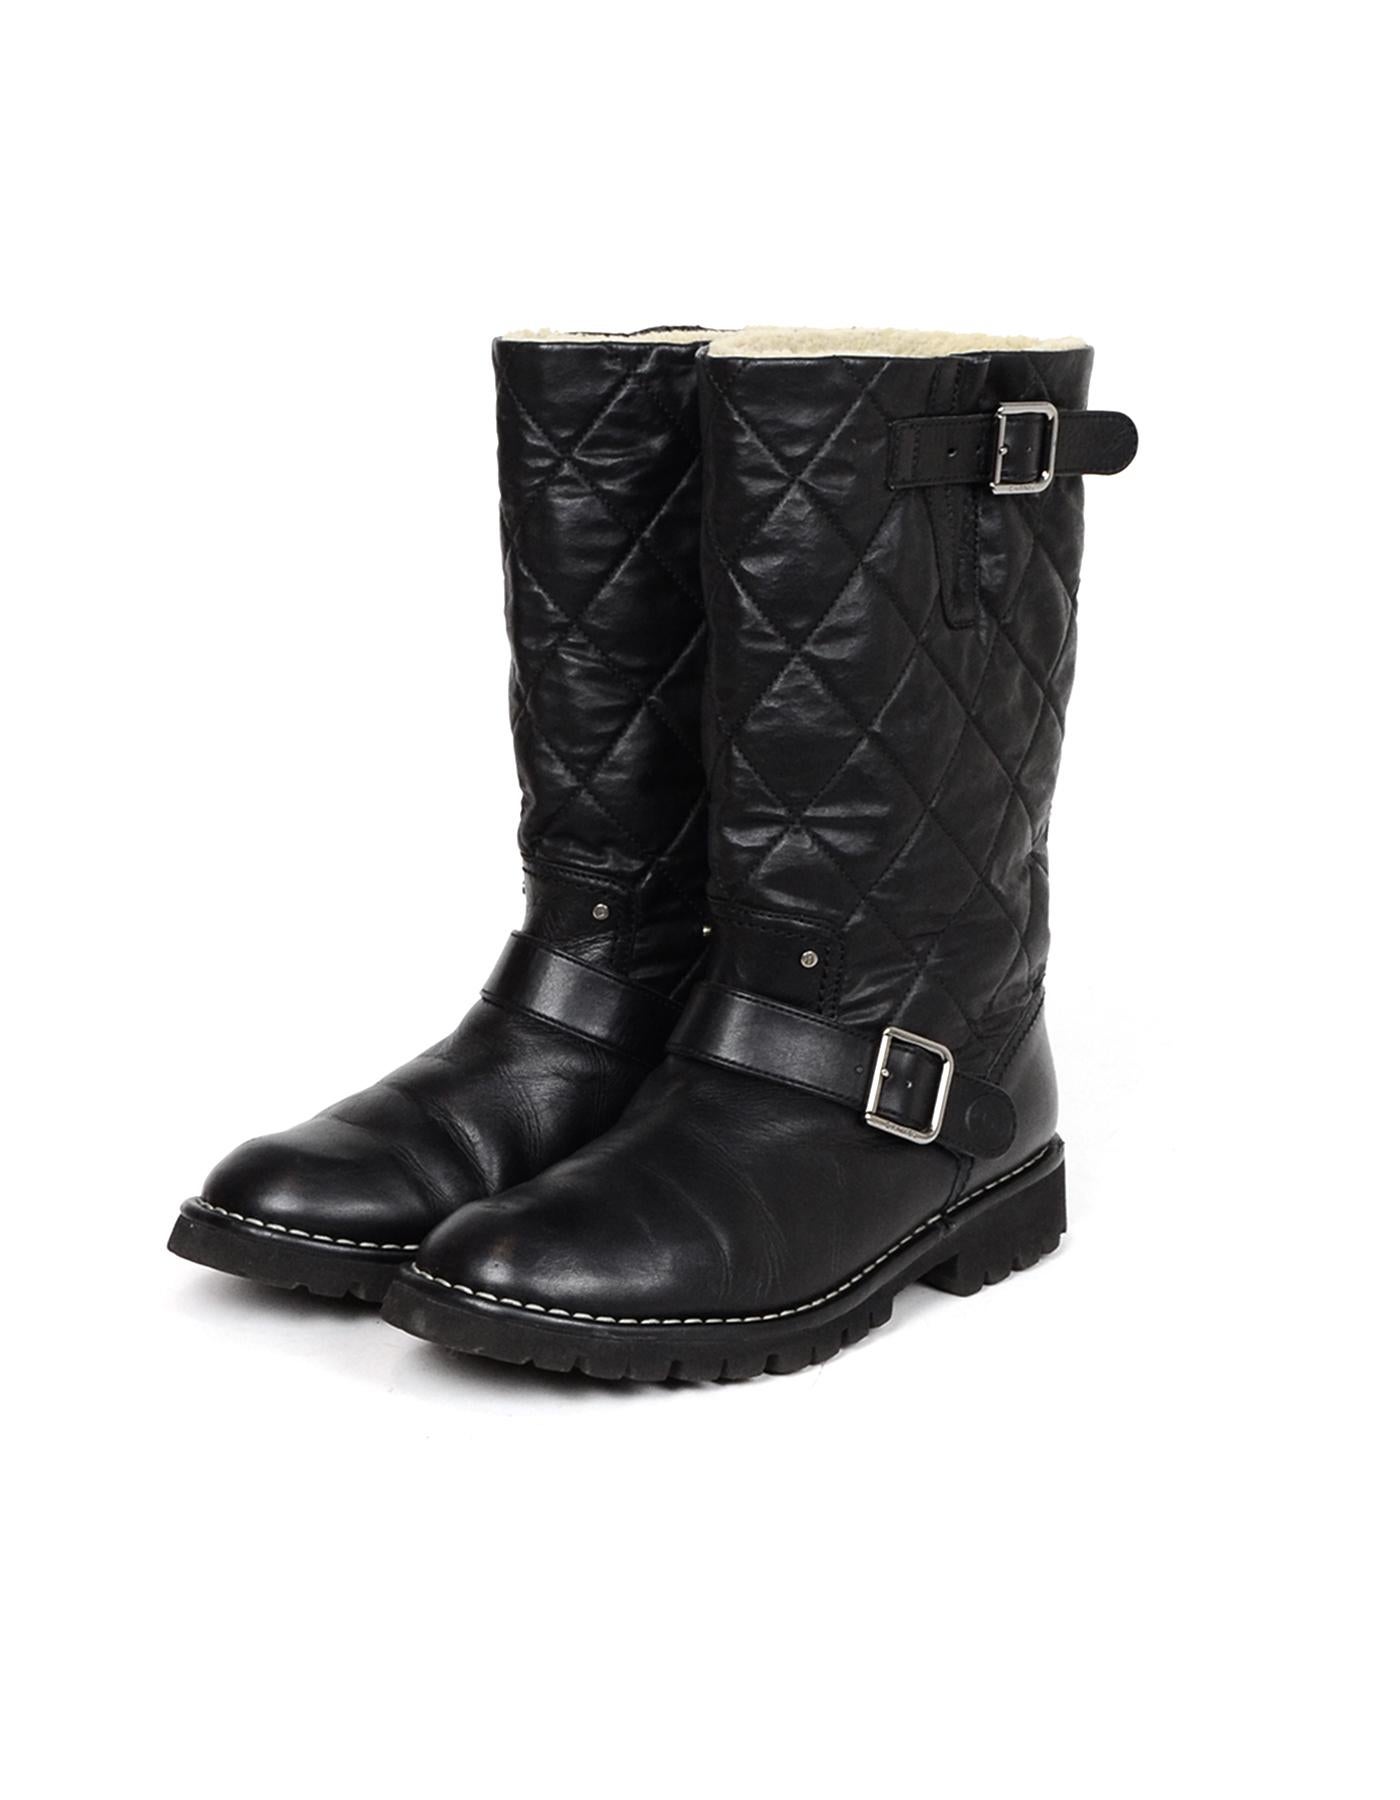 Chanel Black Leather Quilted Moto Boots with Shearling Lining sz 38.5

Made In: Italy
Color: Black
Hardware: Silvertone
Materials: Leather, shearling lining
Closure/Opening: Side buckle
Overall Condition: Excellent pre-owned condition, some small